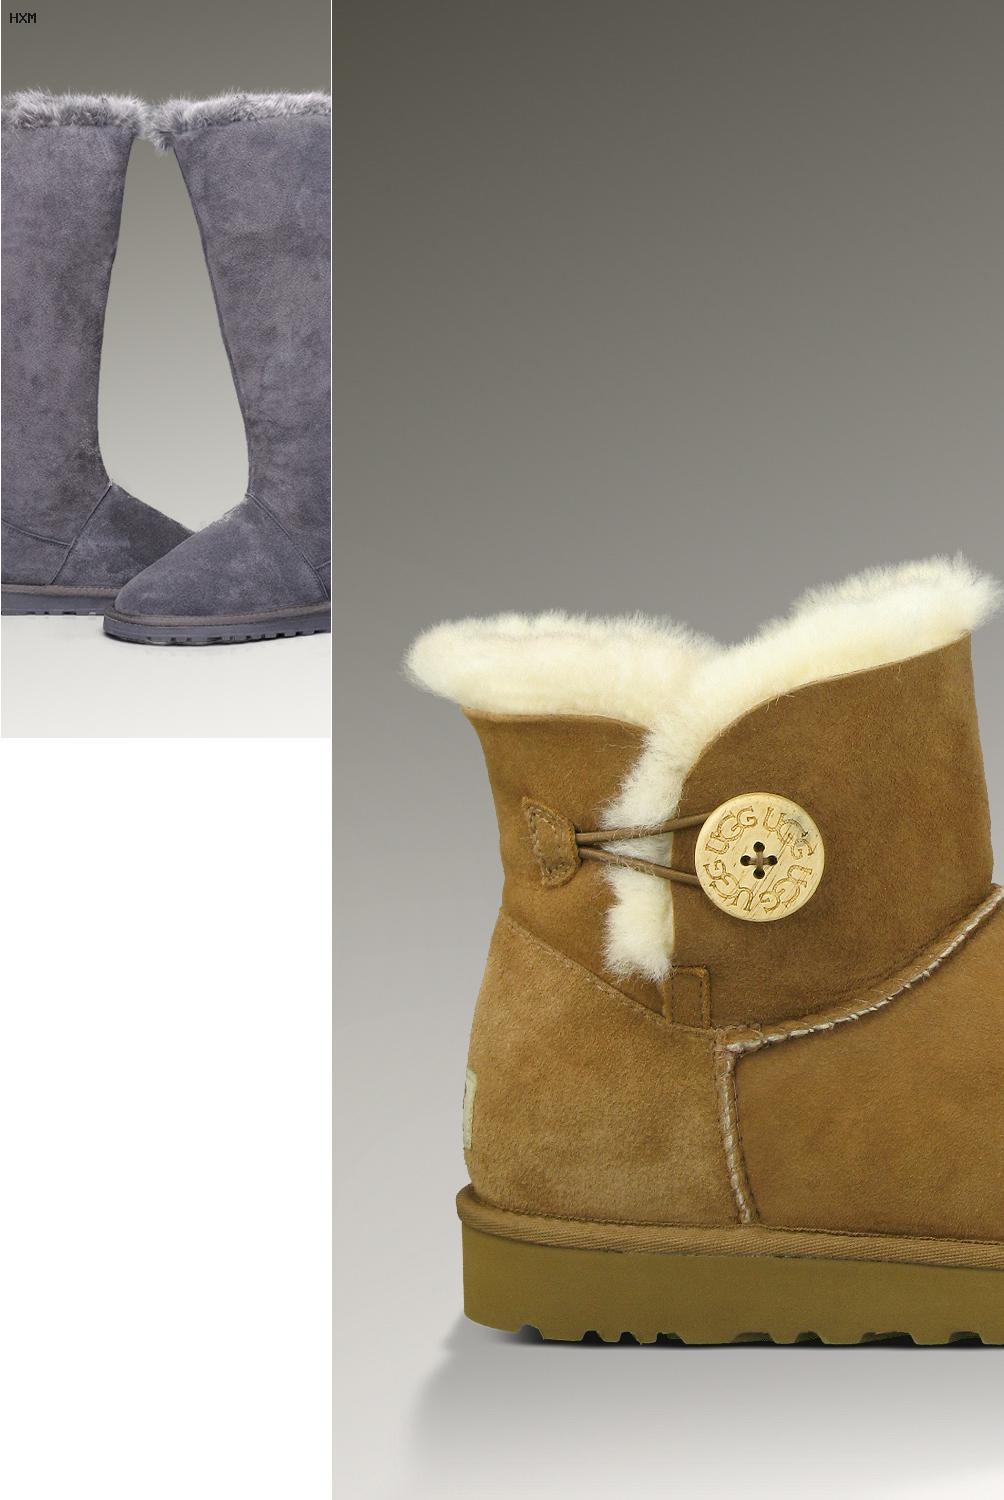 ugg boots madrid spain